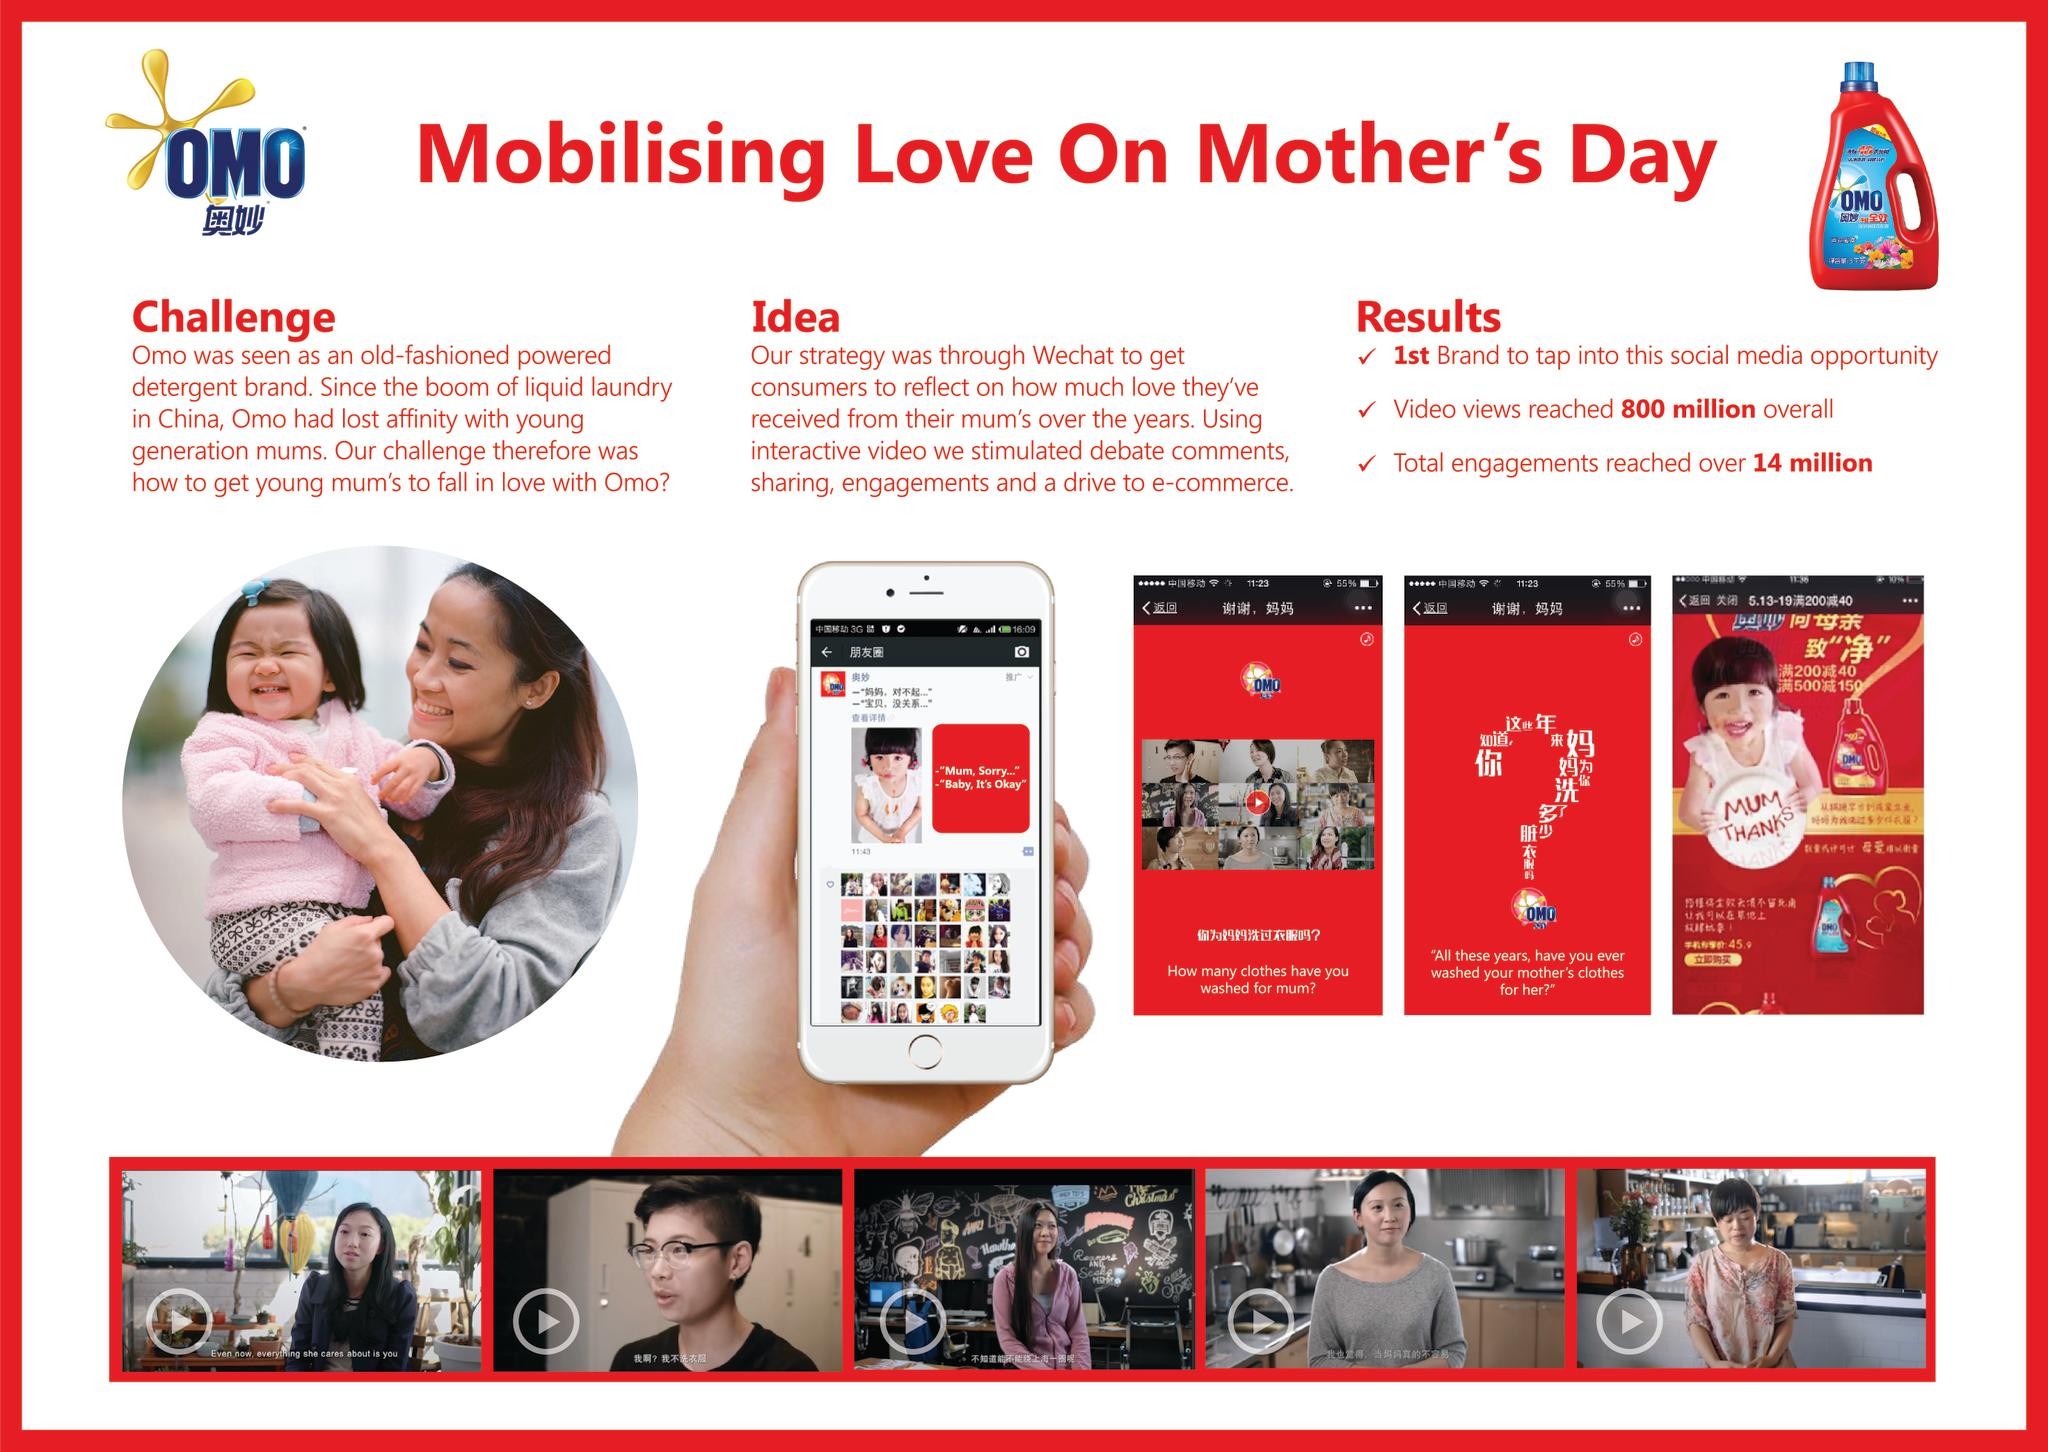 Mobilising Love on Mother's Day